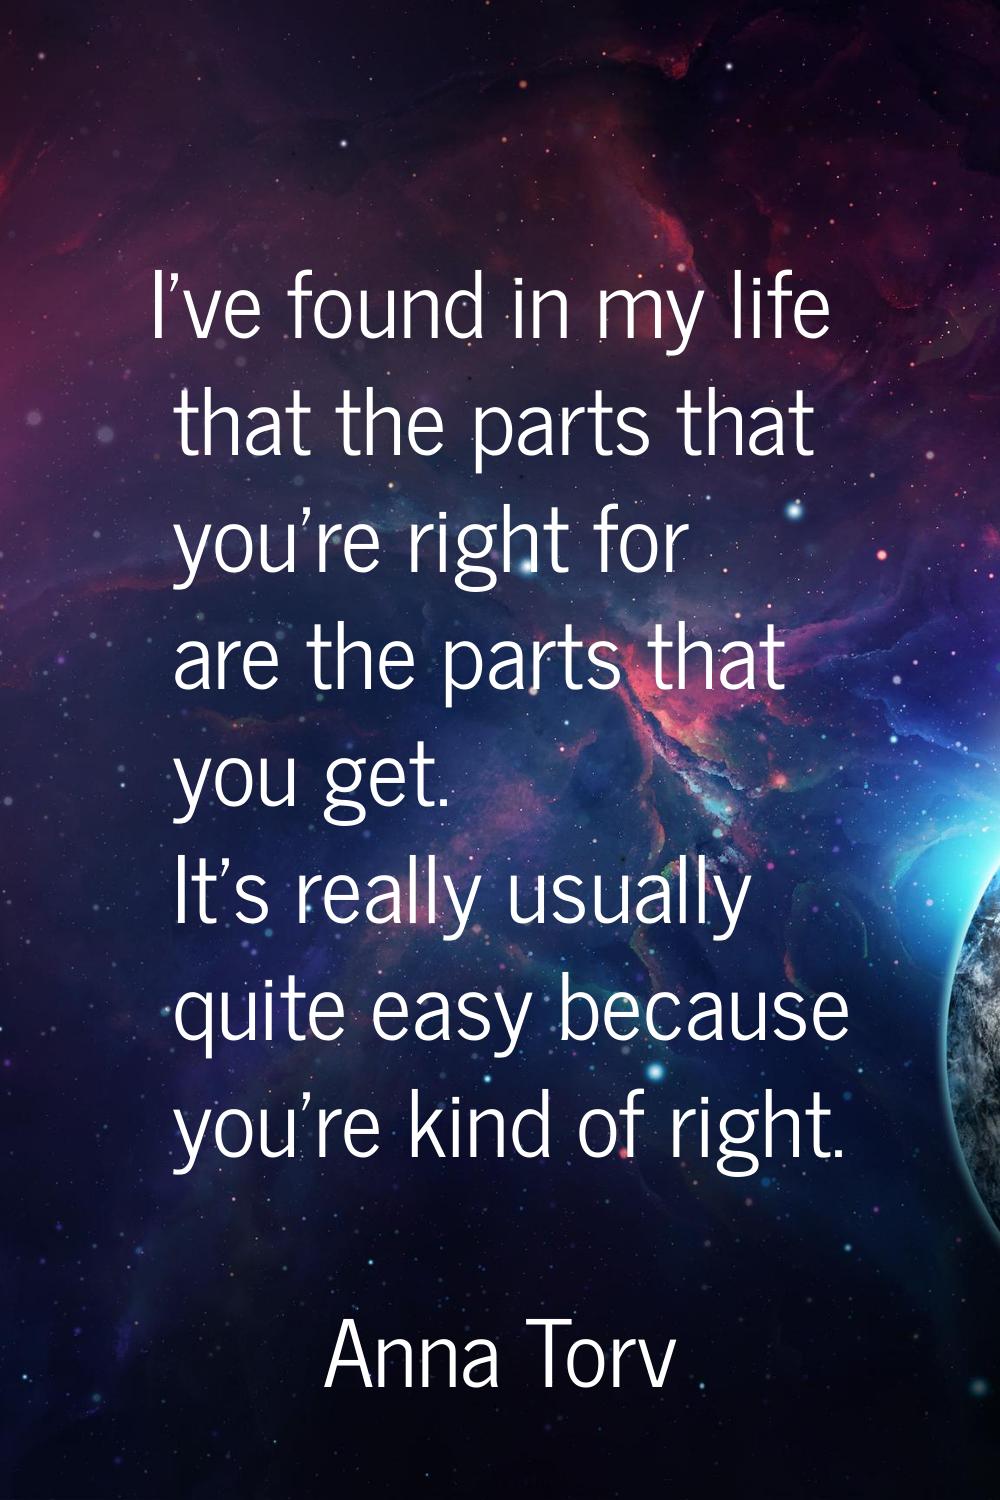 I've found in my life that the parts that you're right for are the parts that you get. It's really 